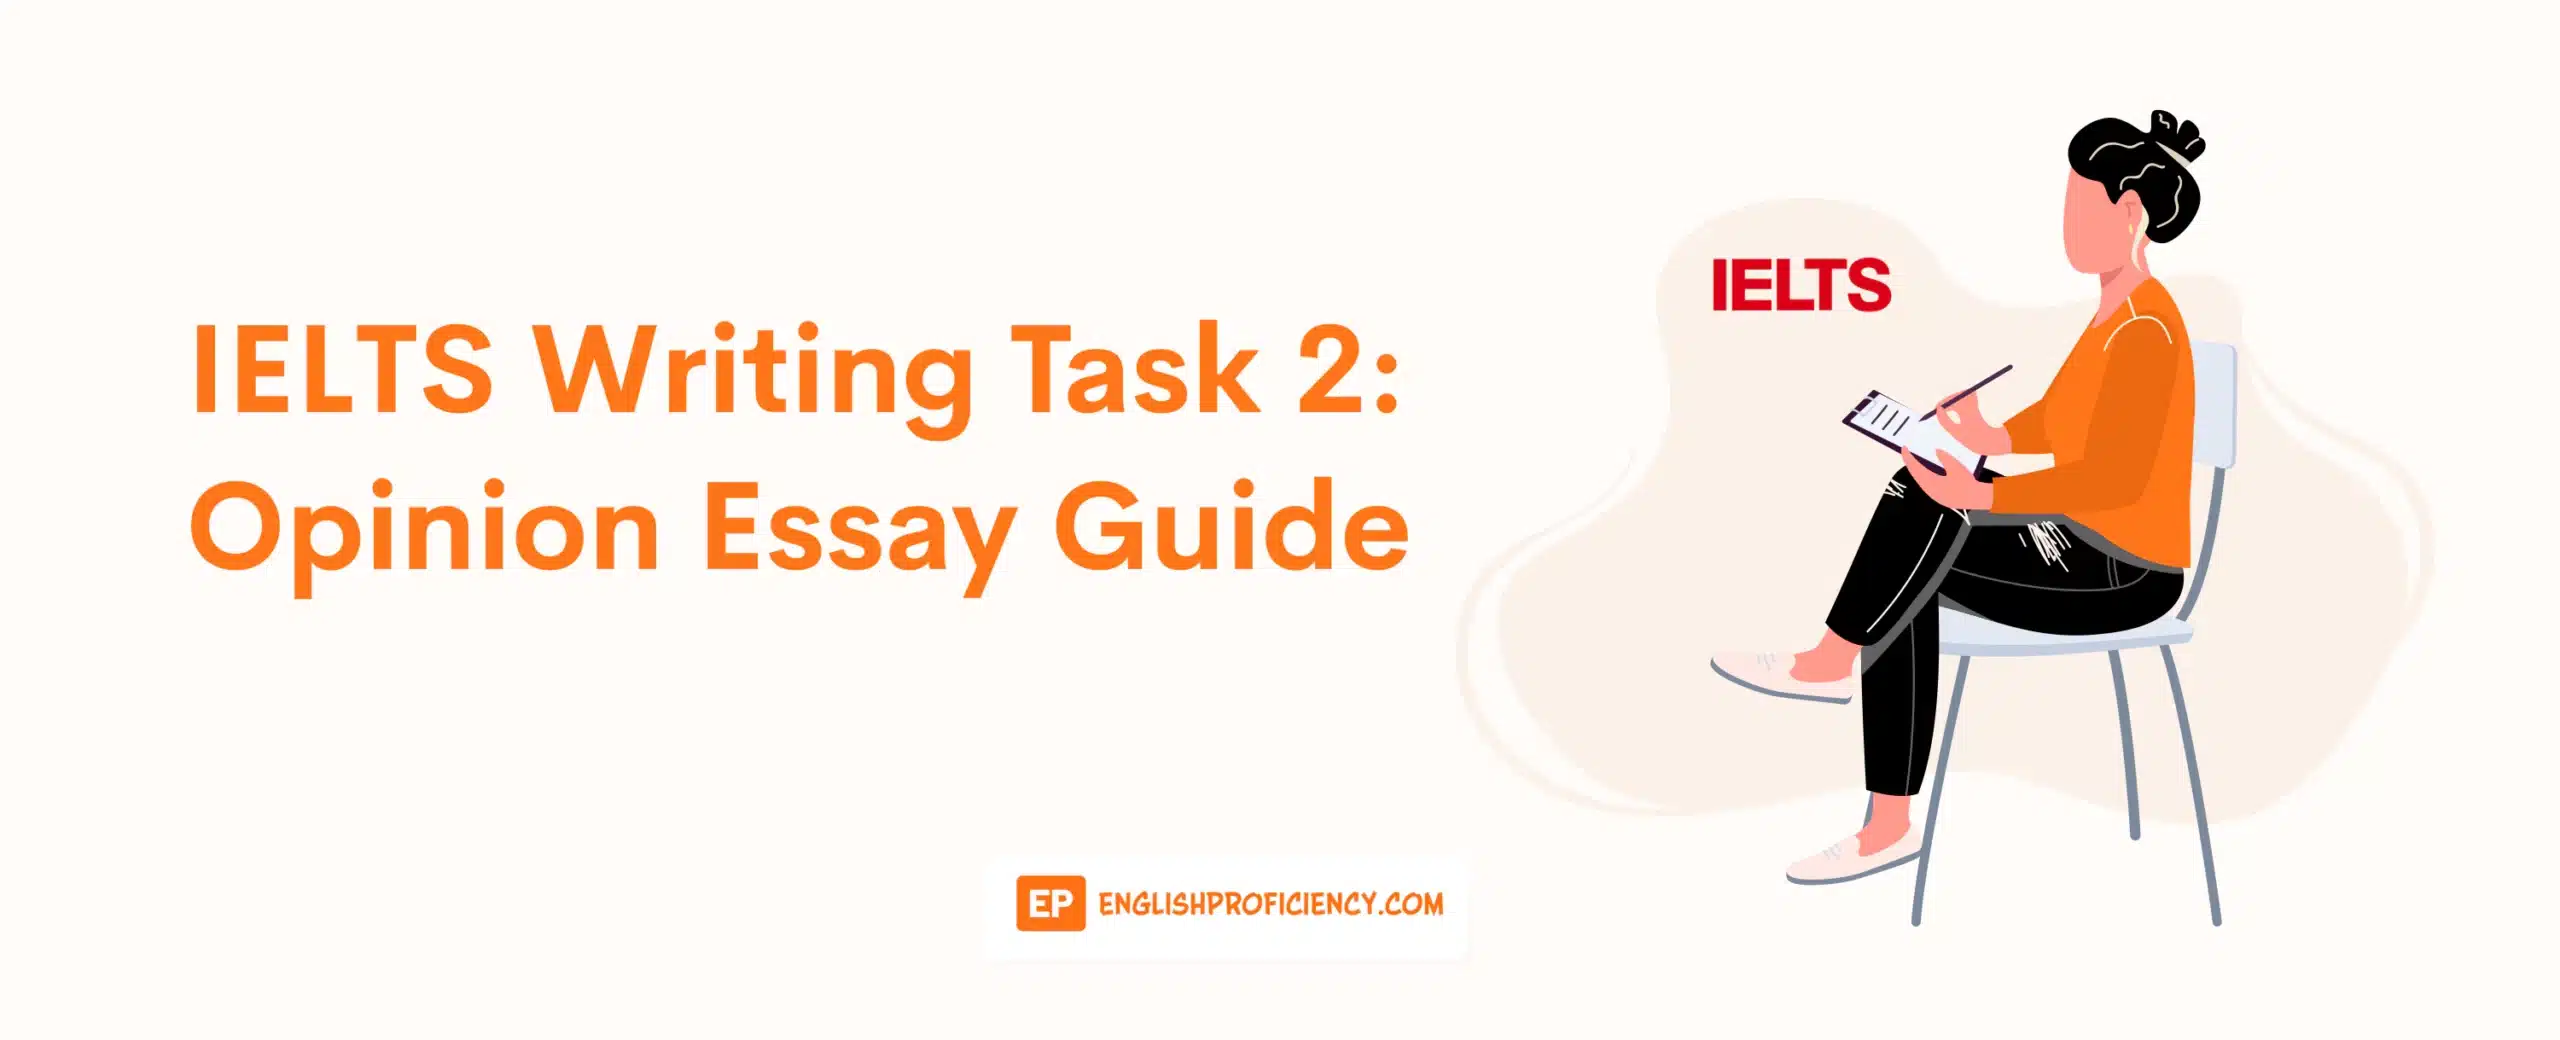 IELTS Writing Task 2 Opinion Essay Guide